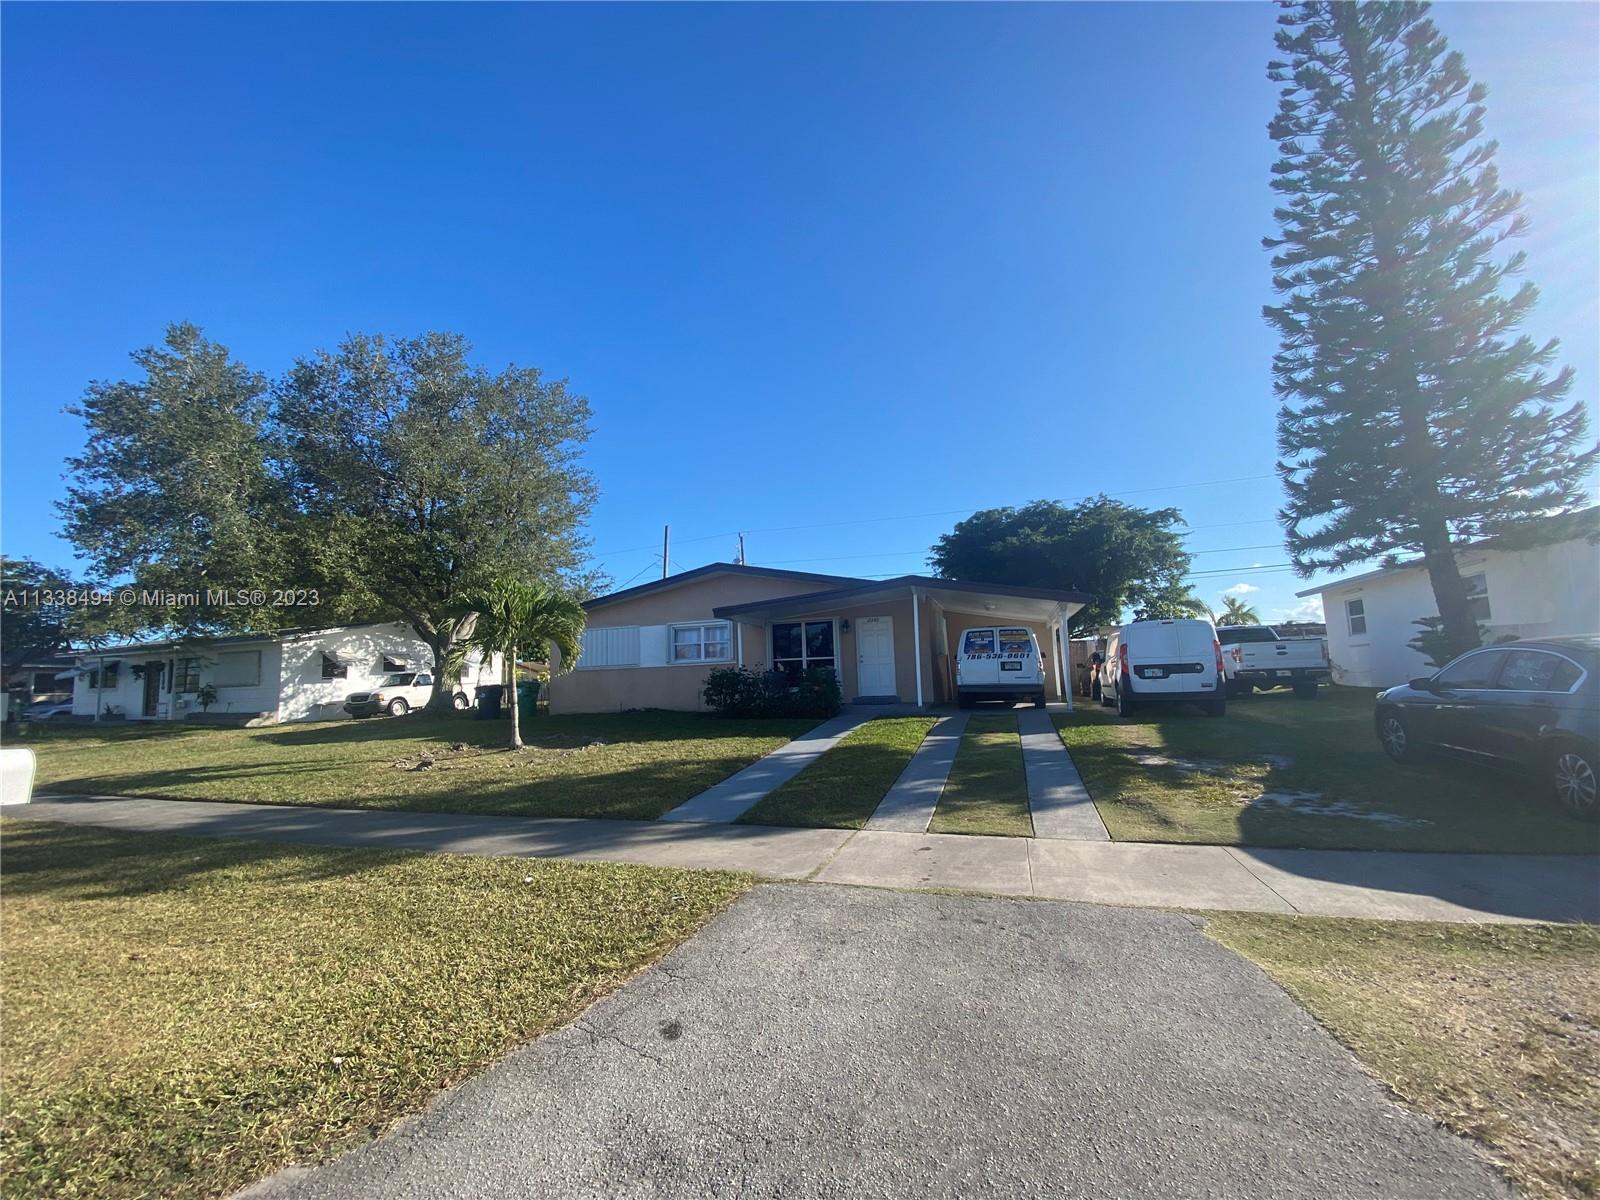 Come see this beautiful home 3 bedrooms and 1 bathroom in a great and loving community.Plenty of parking in your driveway for family get togethers or for a boat on the side of the house.Room for a pool. No association, make this home yours today!! CALL LISTING AGENT FOR MORE INFORMATION.